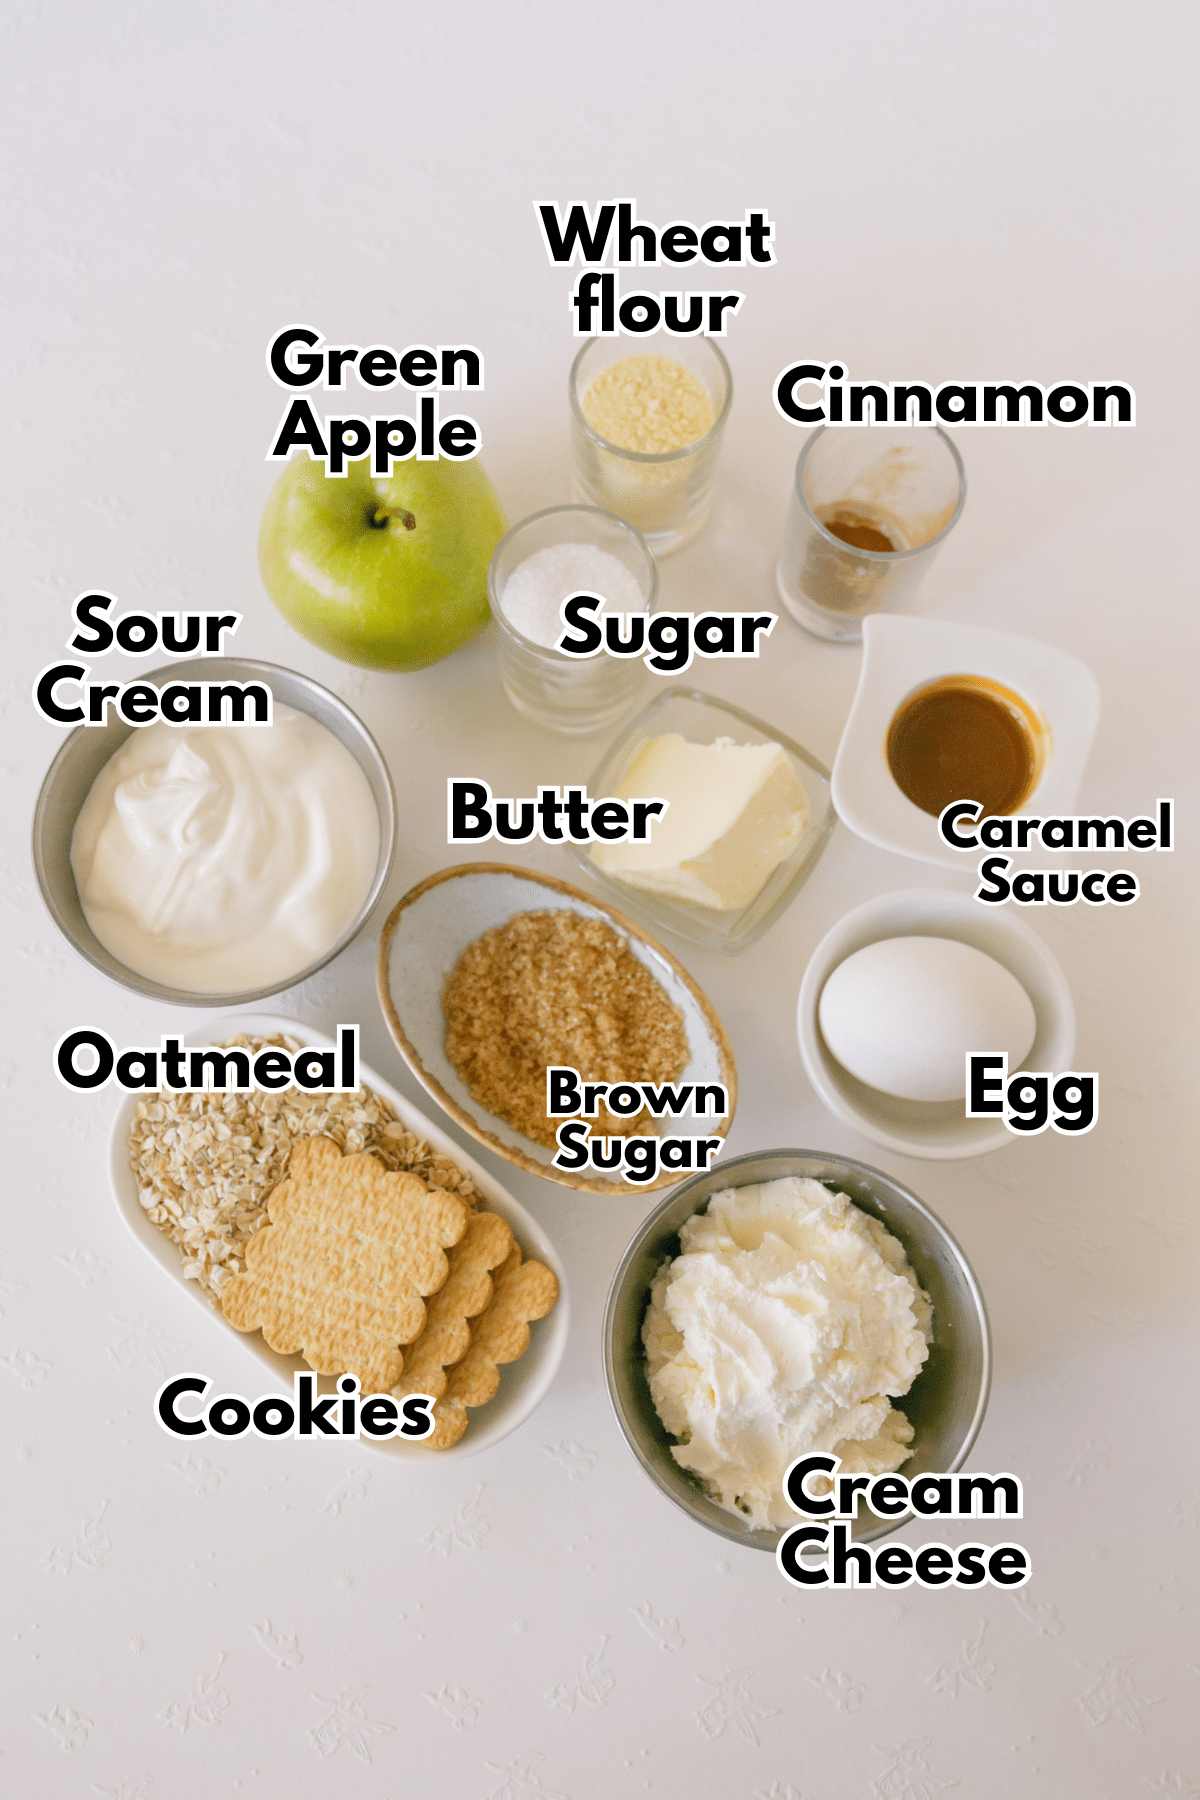 A list of ingredients and images for an apple crumble cheesecake.